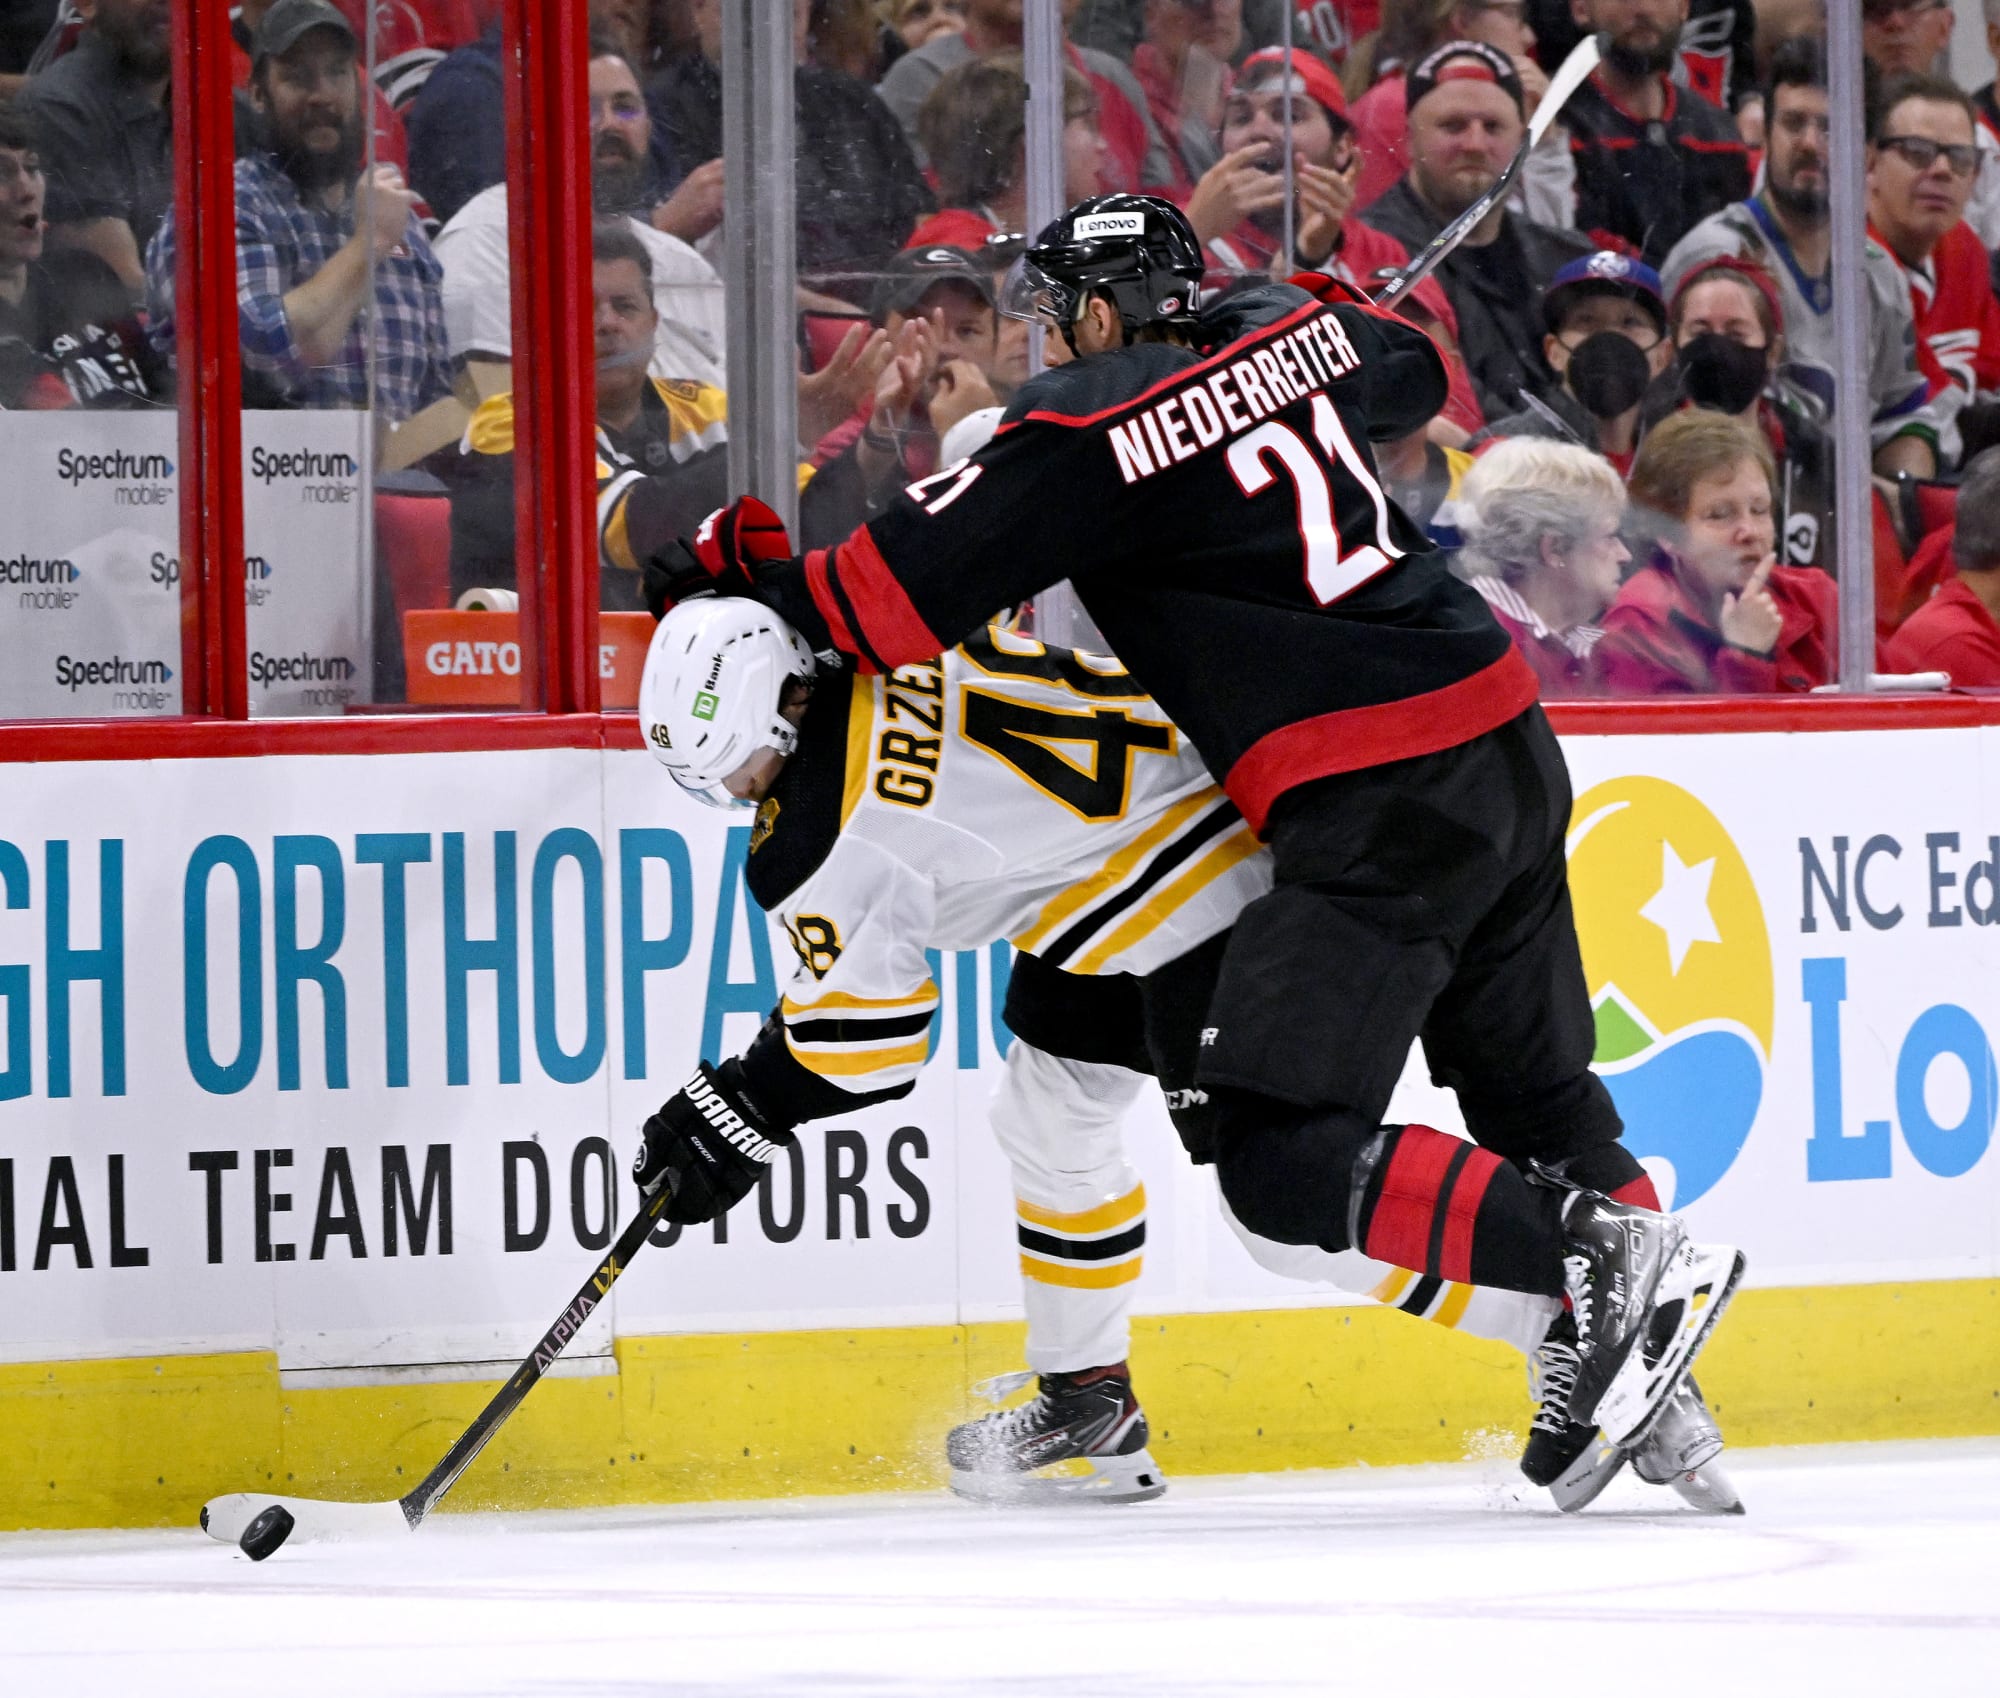 Niederreiter scores 2, short-handed Carolina beats Red Wings – The